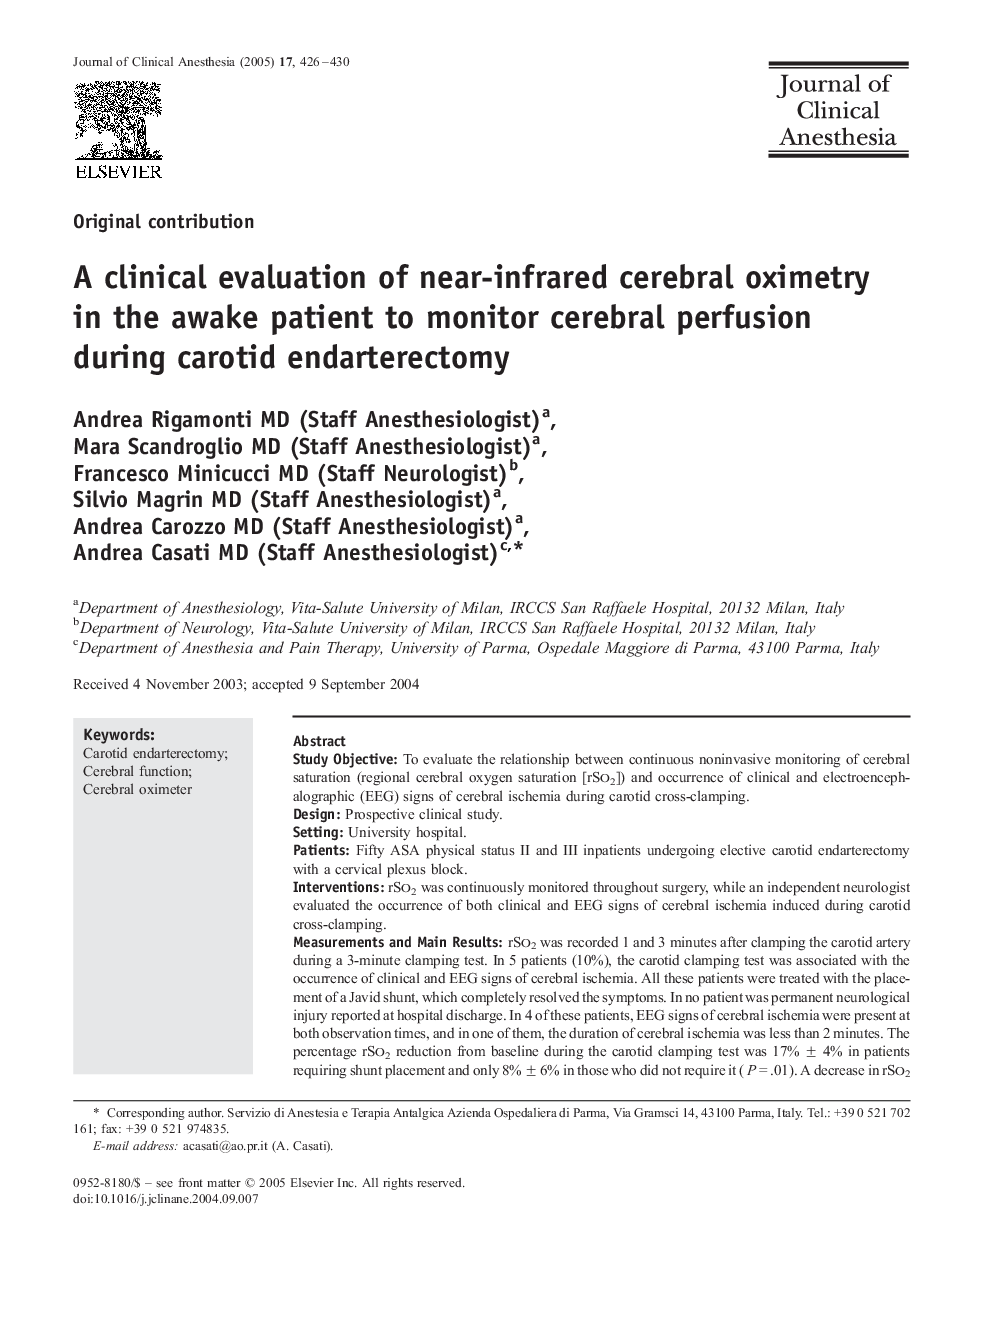 A clinical evaluation of near-infrared cerebral oximetry in the awake patient to monitor cerebral perfusion during carotid endarterectomy